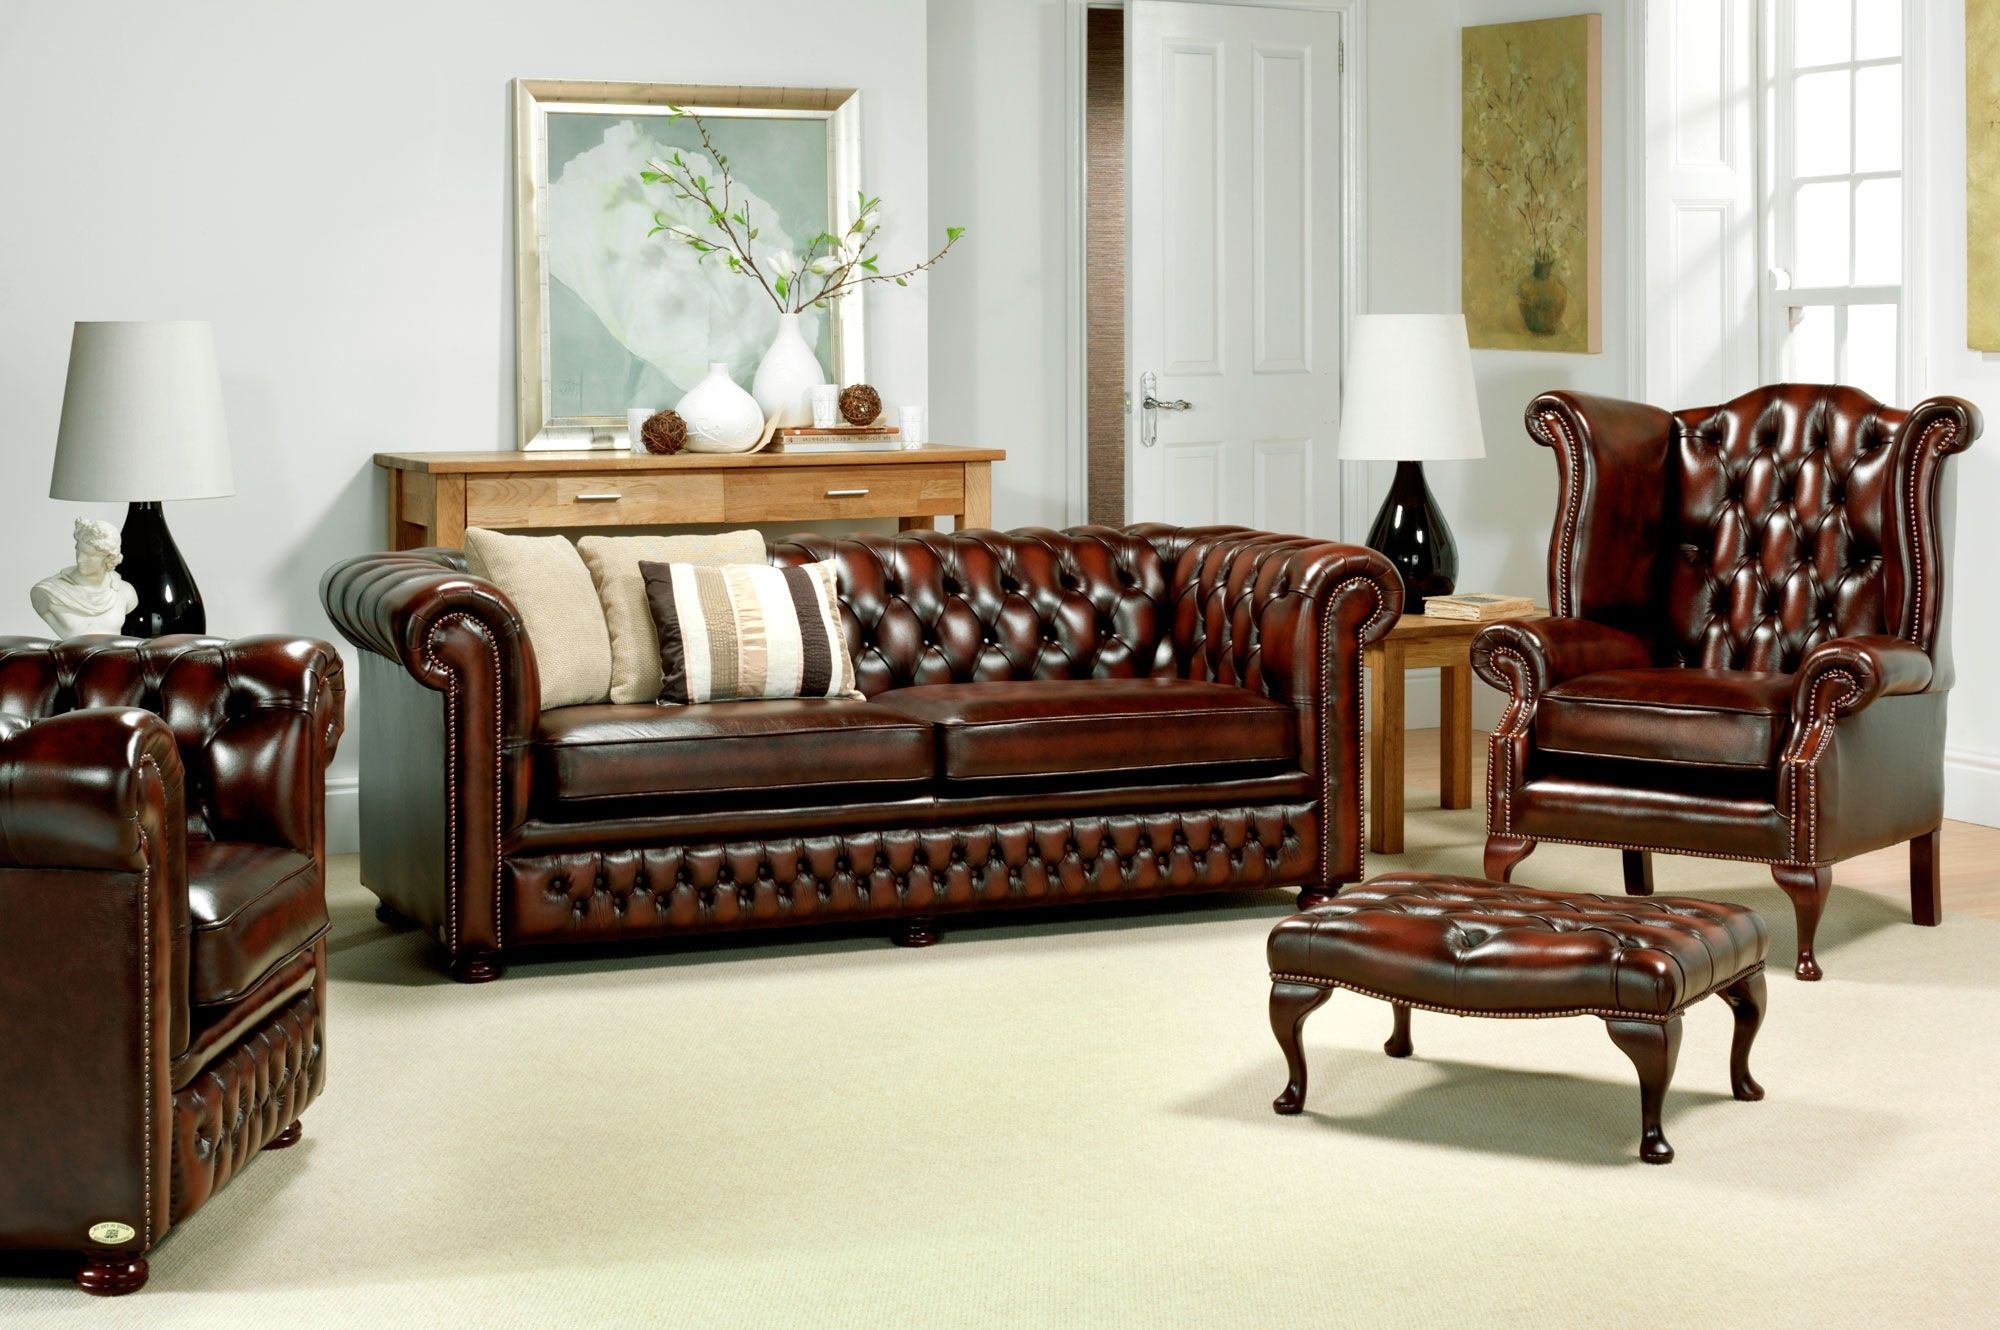 Most Recent Chesterfield Sofas And Chairs Intended For Leather Chesterfield Sofa Set — Fabrizio Design : Leather (View 1 of 15)